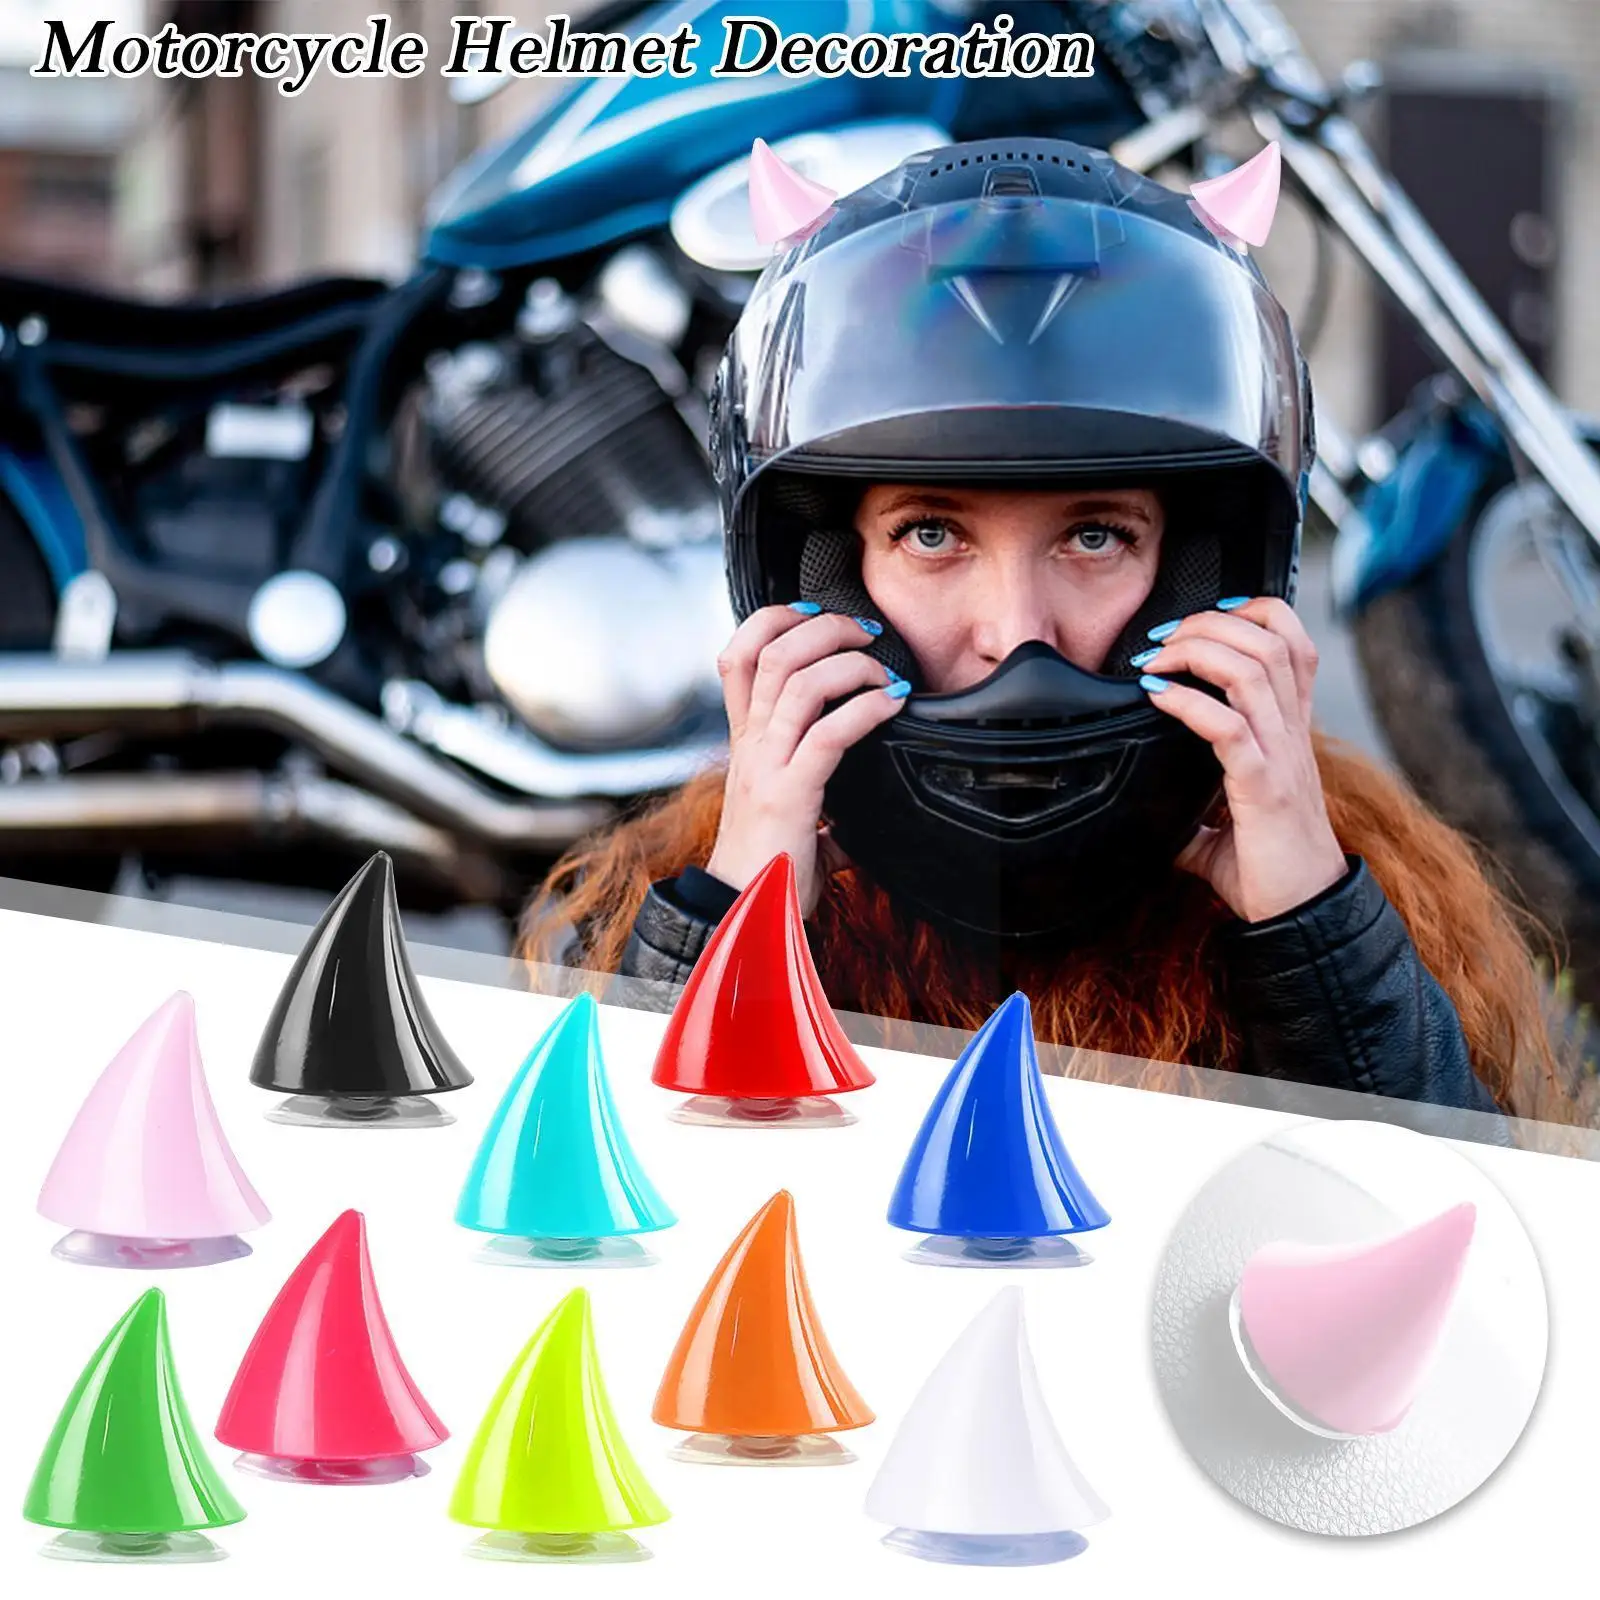 

Motorcycle Helmet Devil Horn Motocross Full Face Off Decoration Horns Electric Road Decoration Personality Helmet Vehicle H X9D9